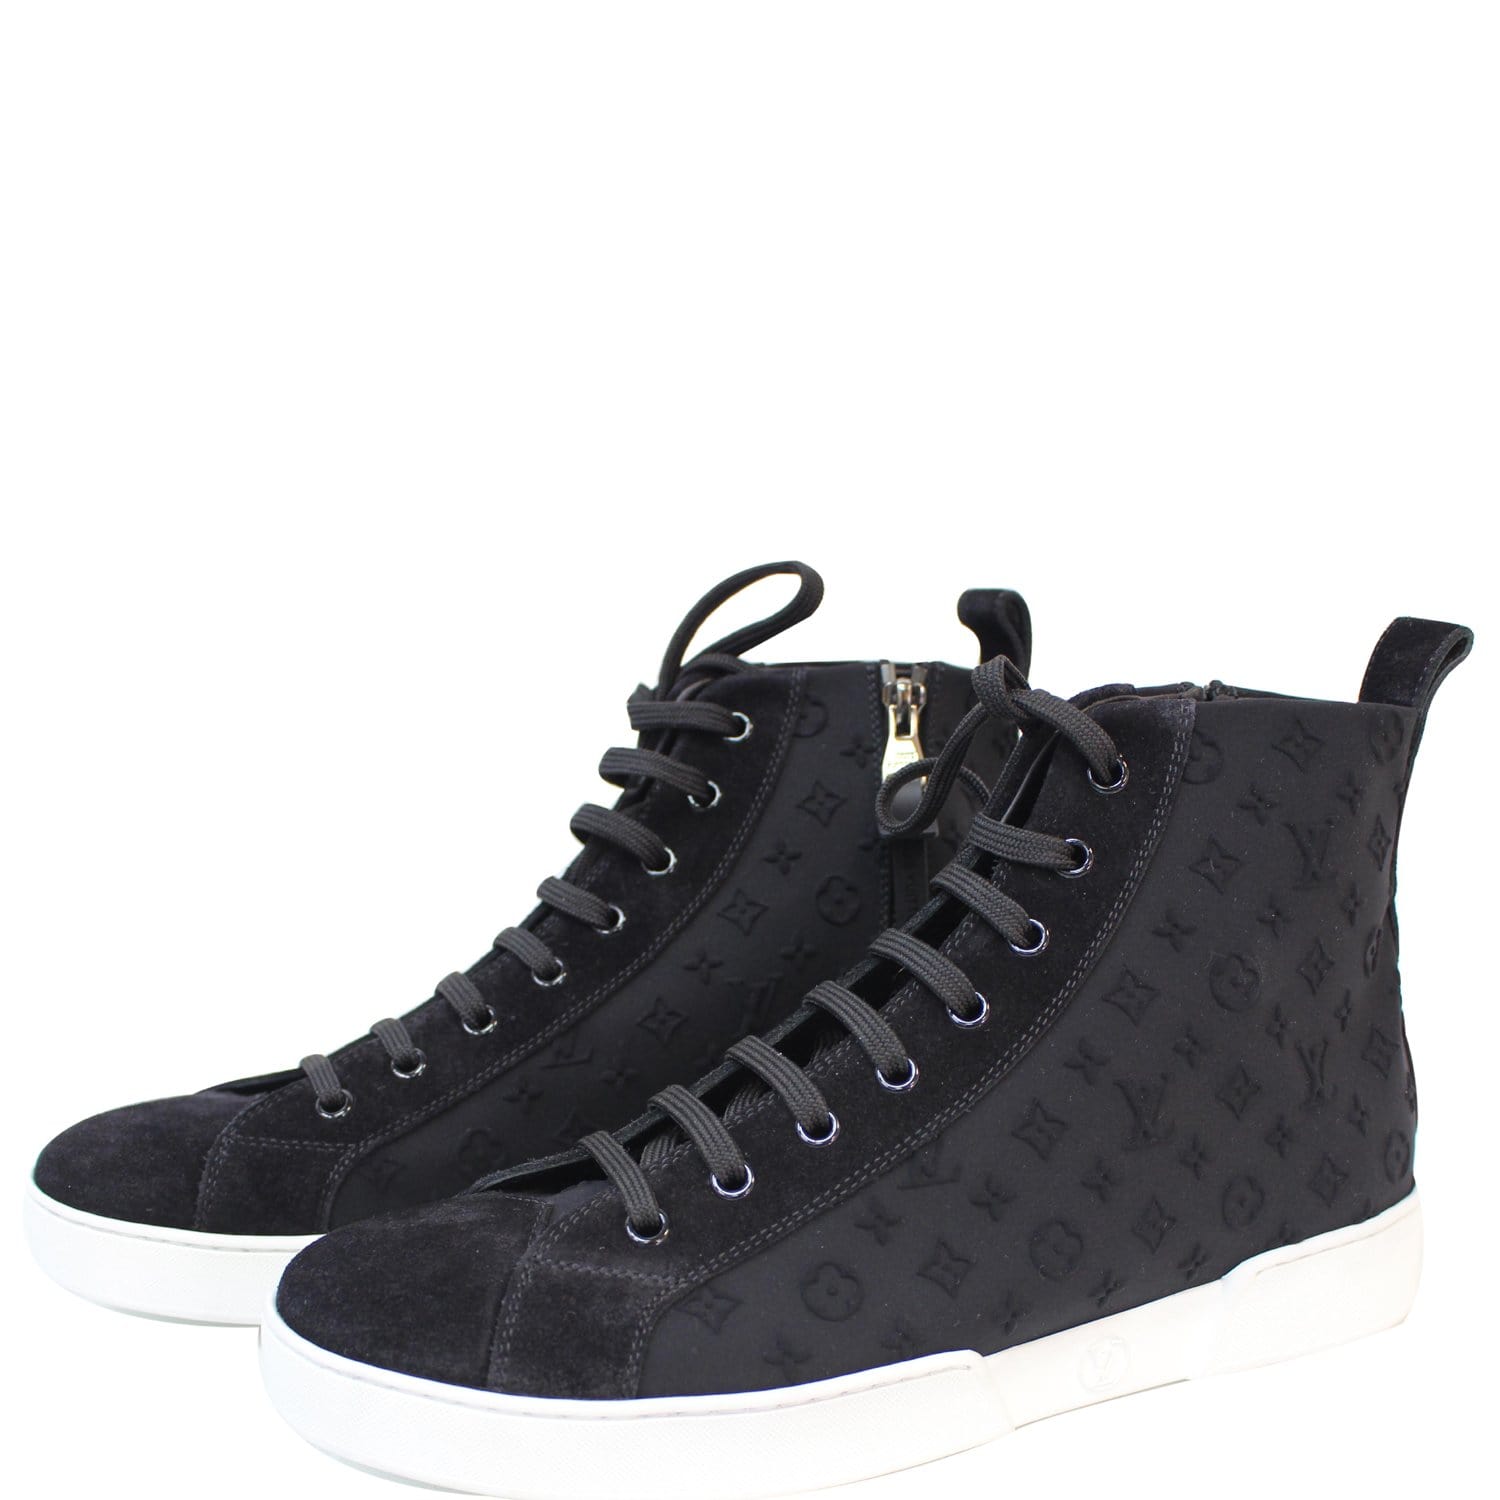 Louis Vuitton High Cut Leather Sneakers